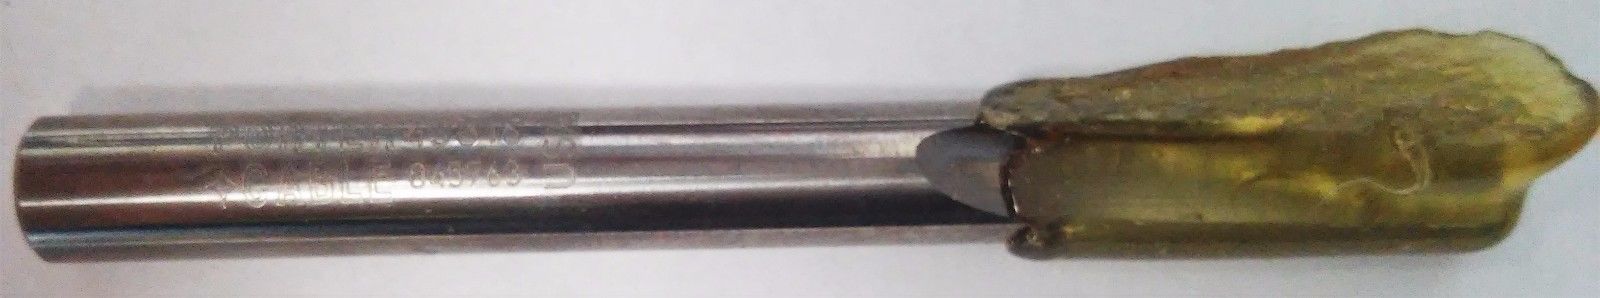 Porter-Cable 43816PC 1/4" Solid Carbide Straight Router Bit 1/4" Shank